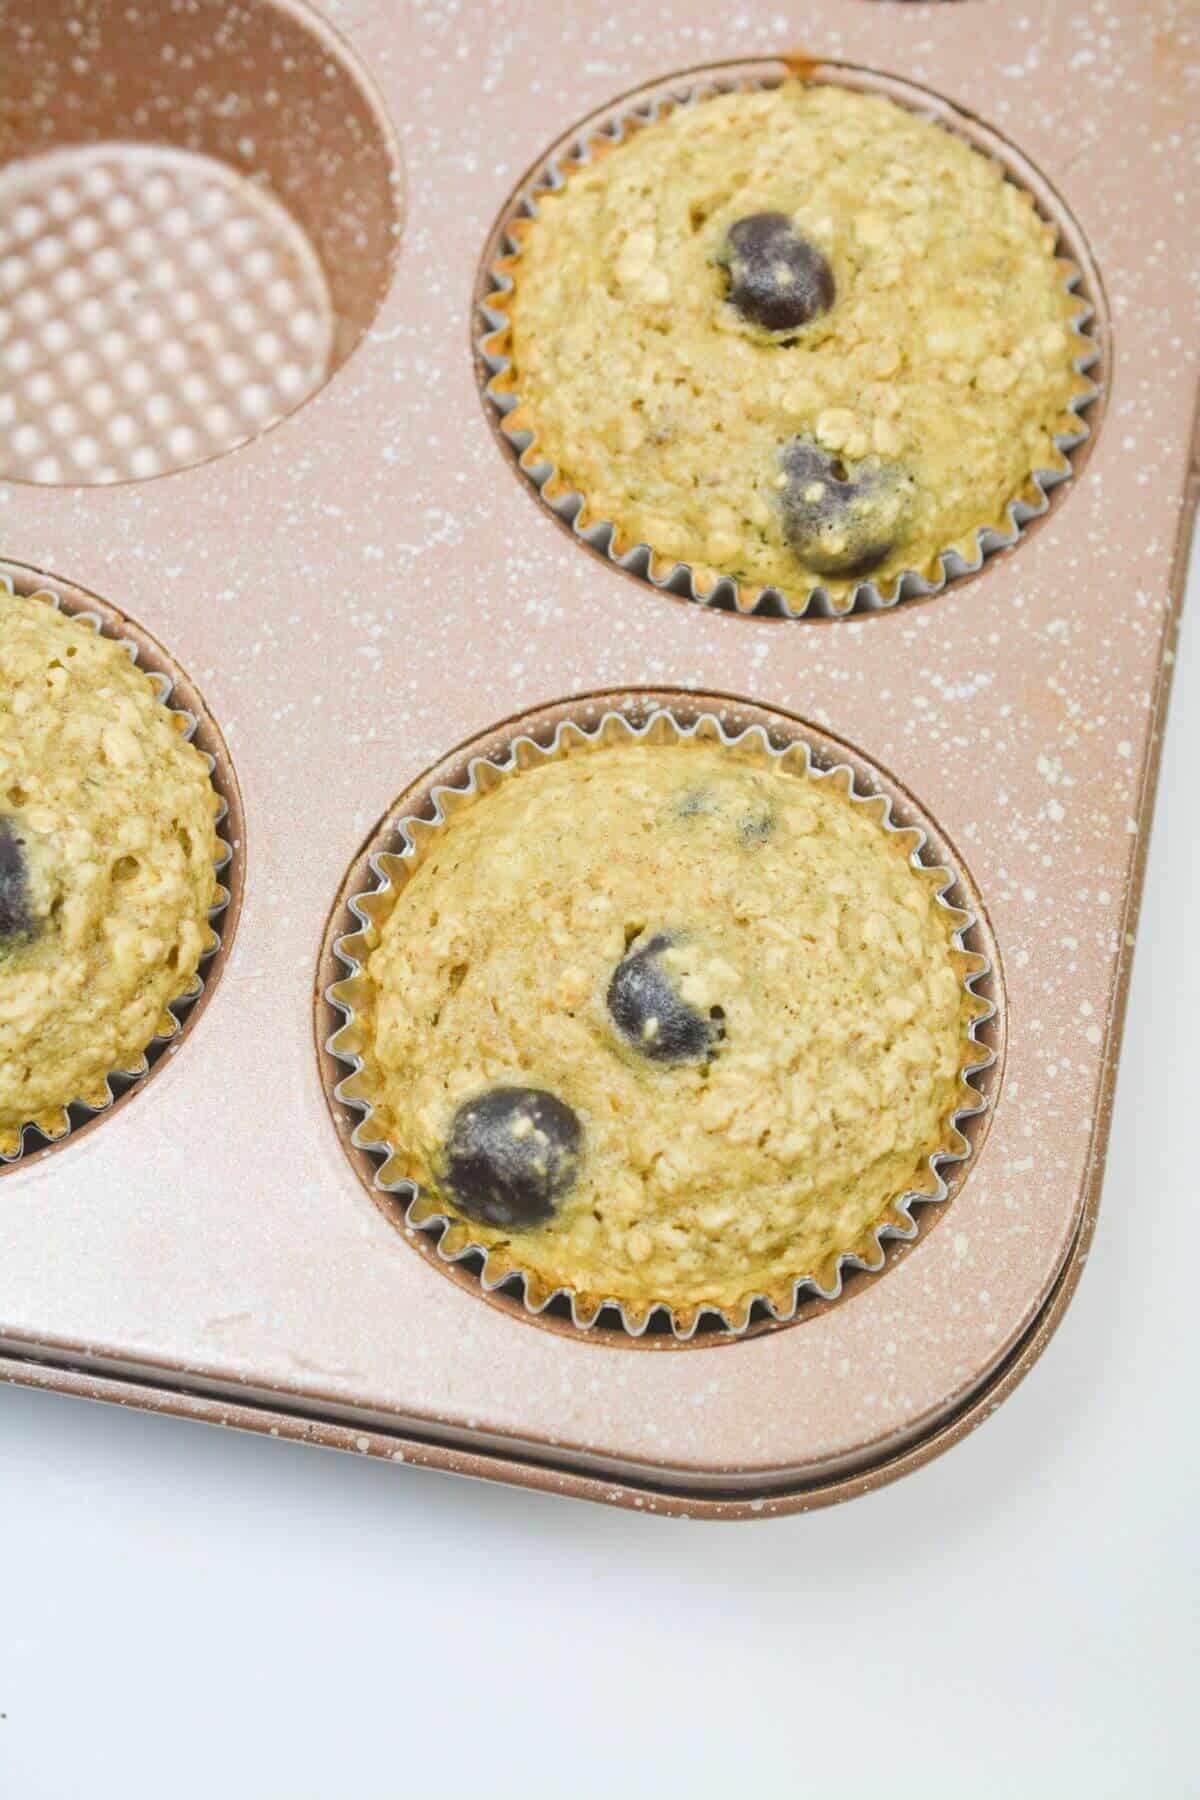 Baked muffins in baking pan.